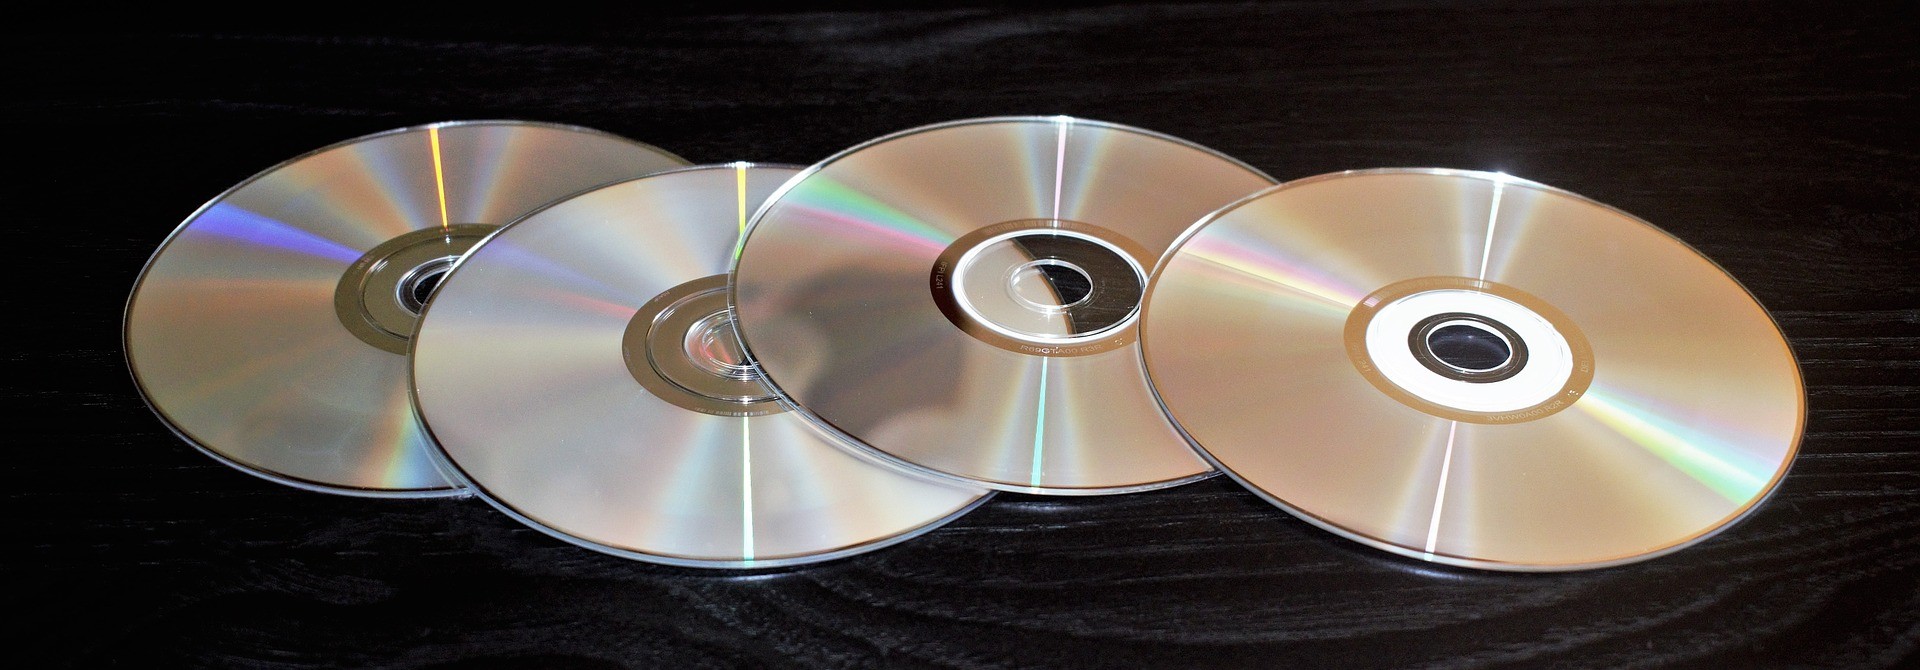 DVD Duplication Services Industry